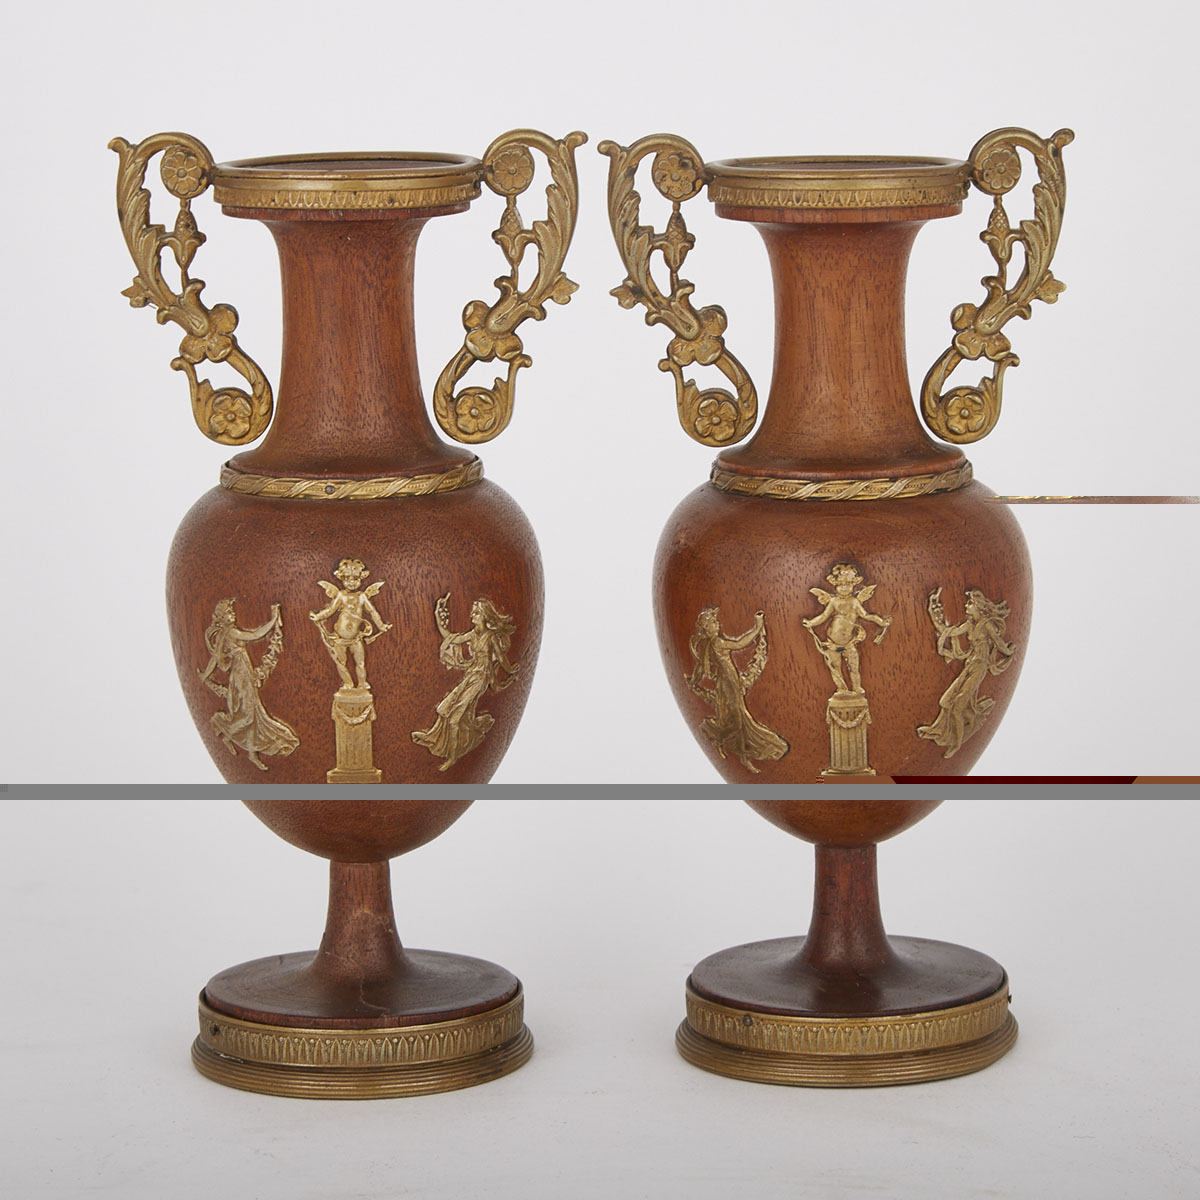 Pair of French Ormolu Mounted Turned Walnut Vases, 19th/early 20th century